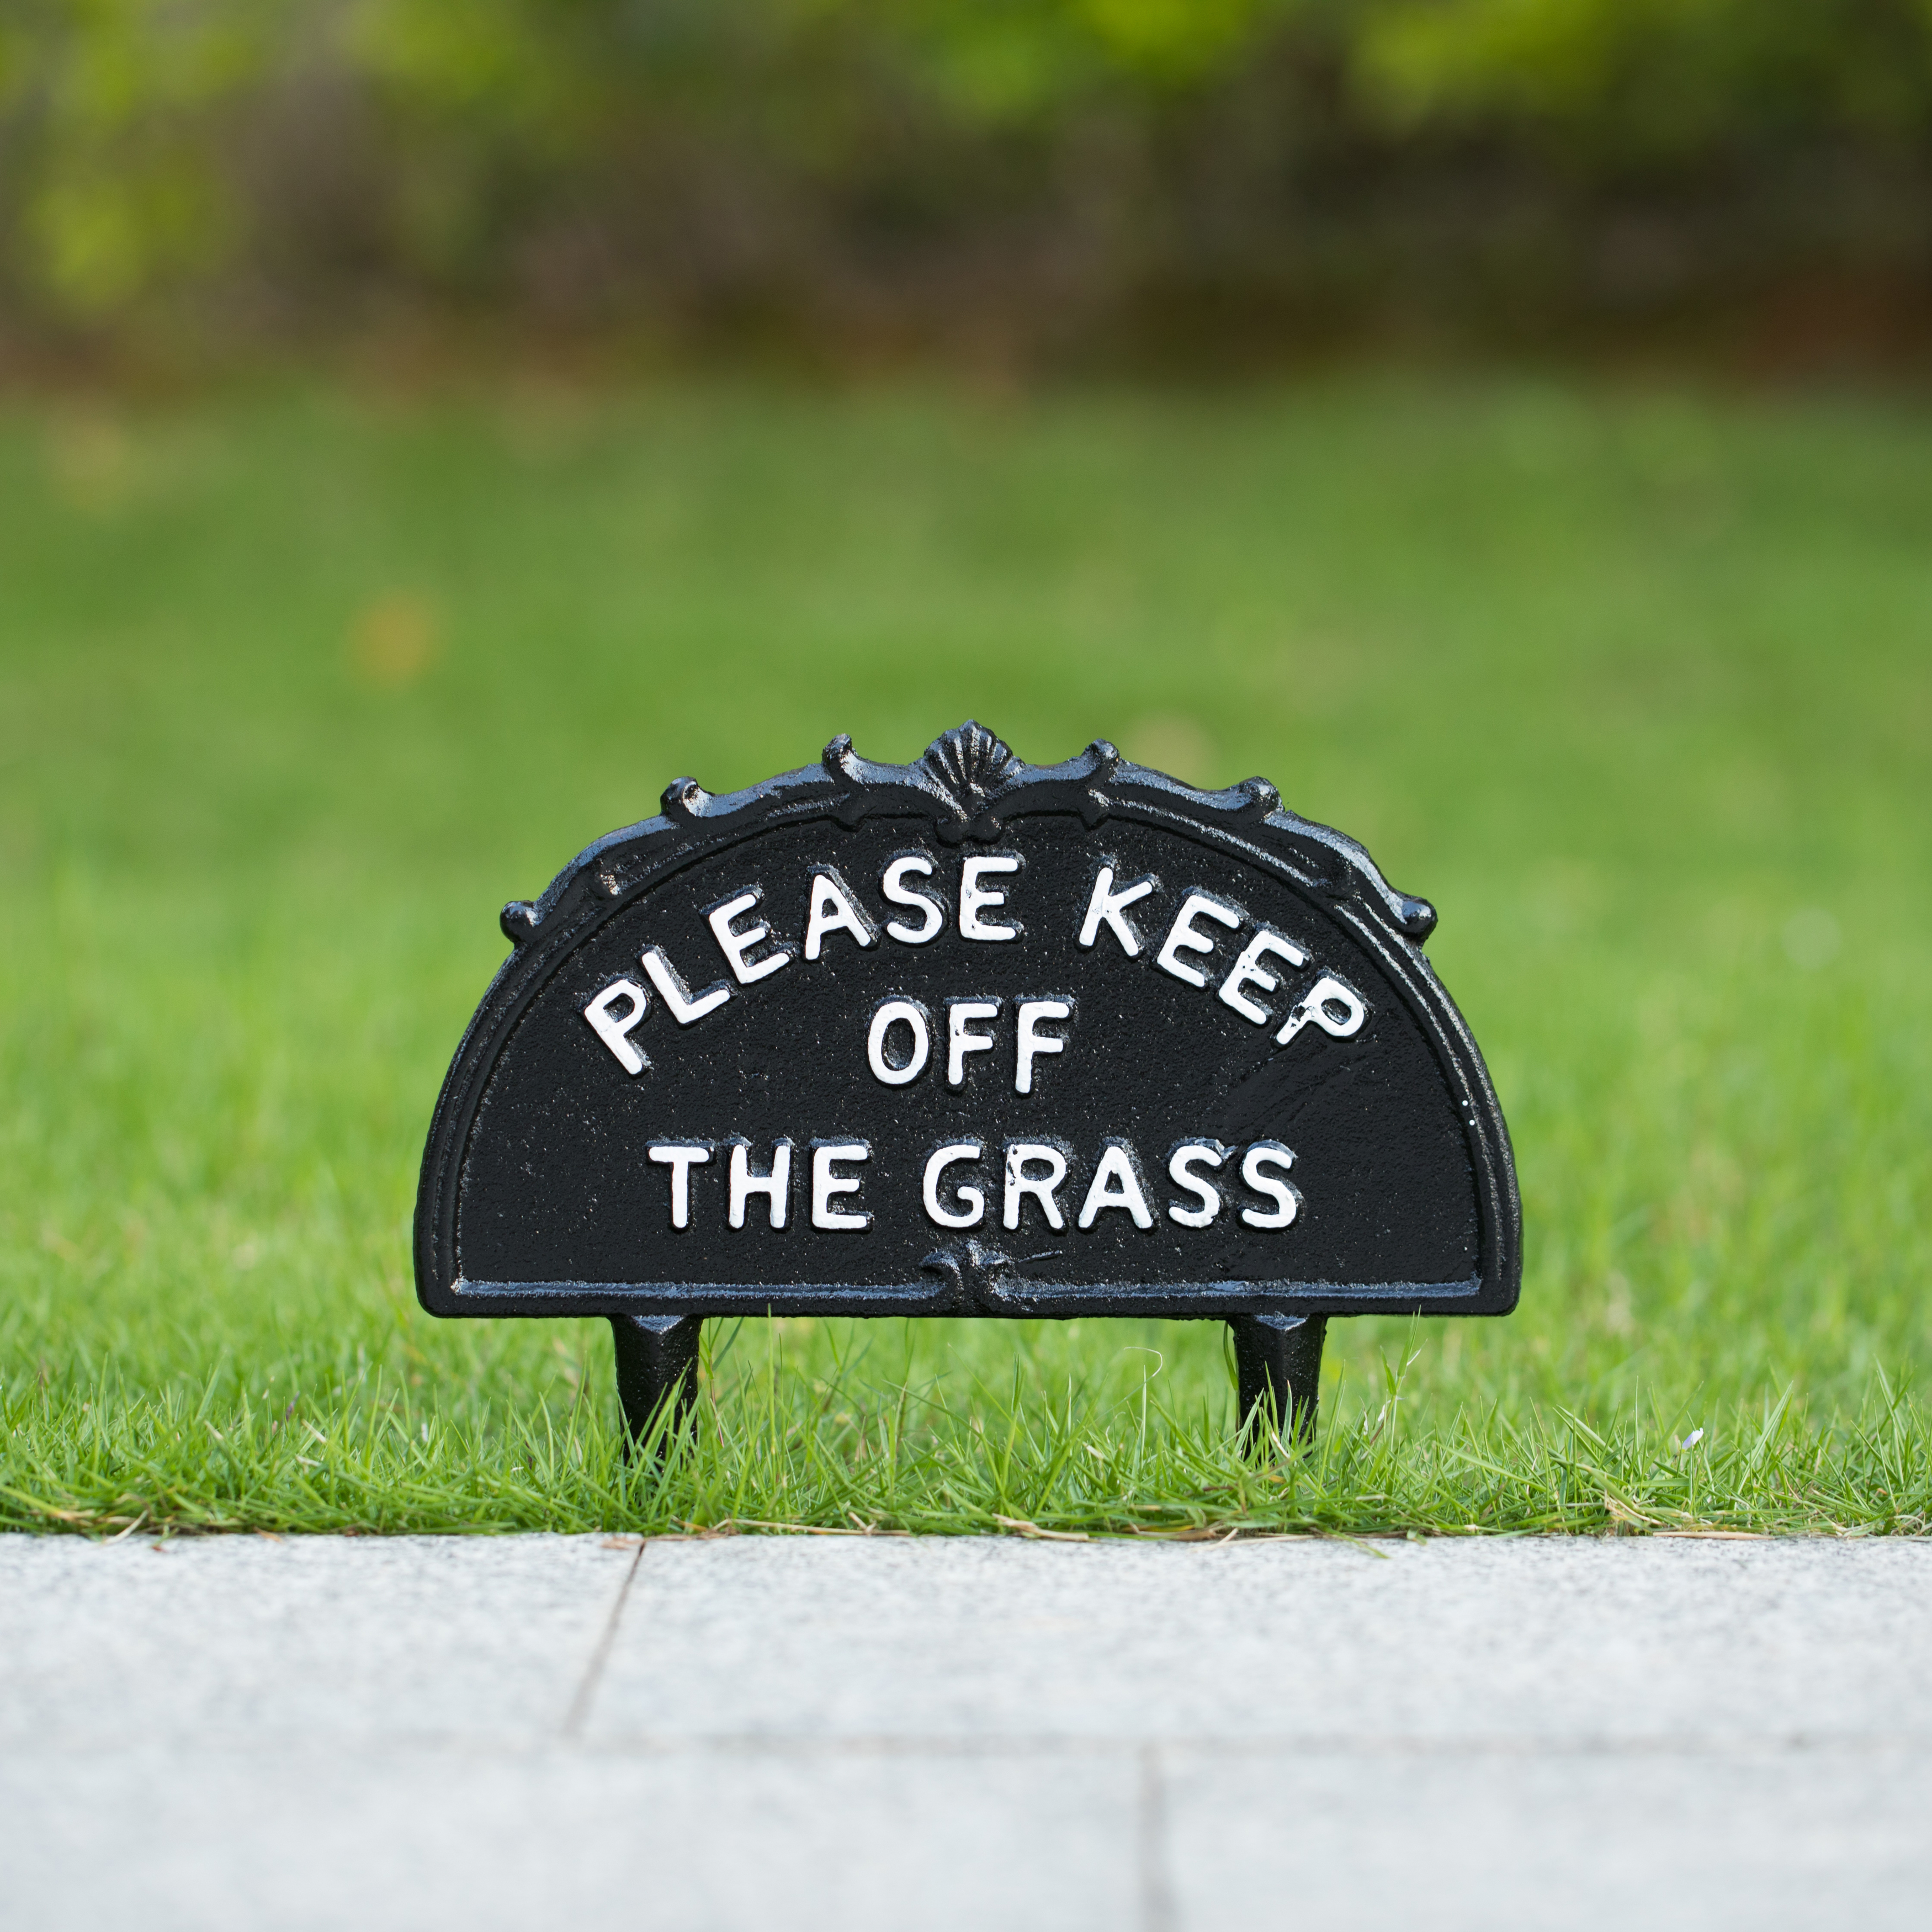 Decorative Please Keep Off The Grass Post, Outdoor Warning Ground Cast Iron Stake, Black